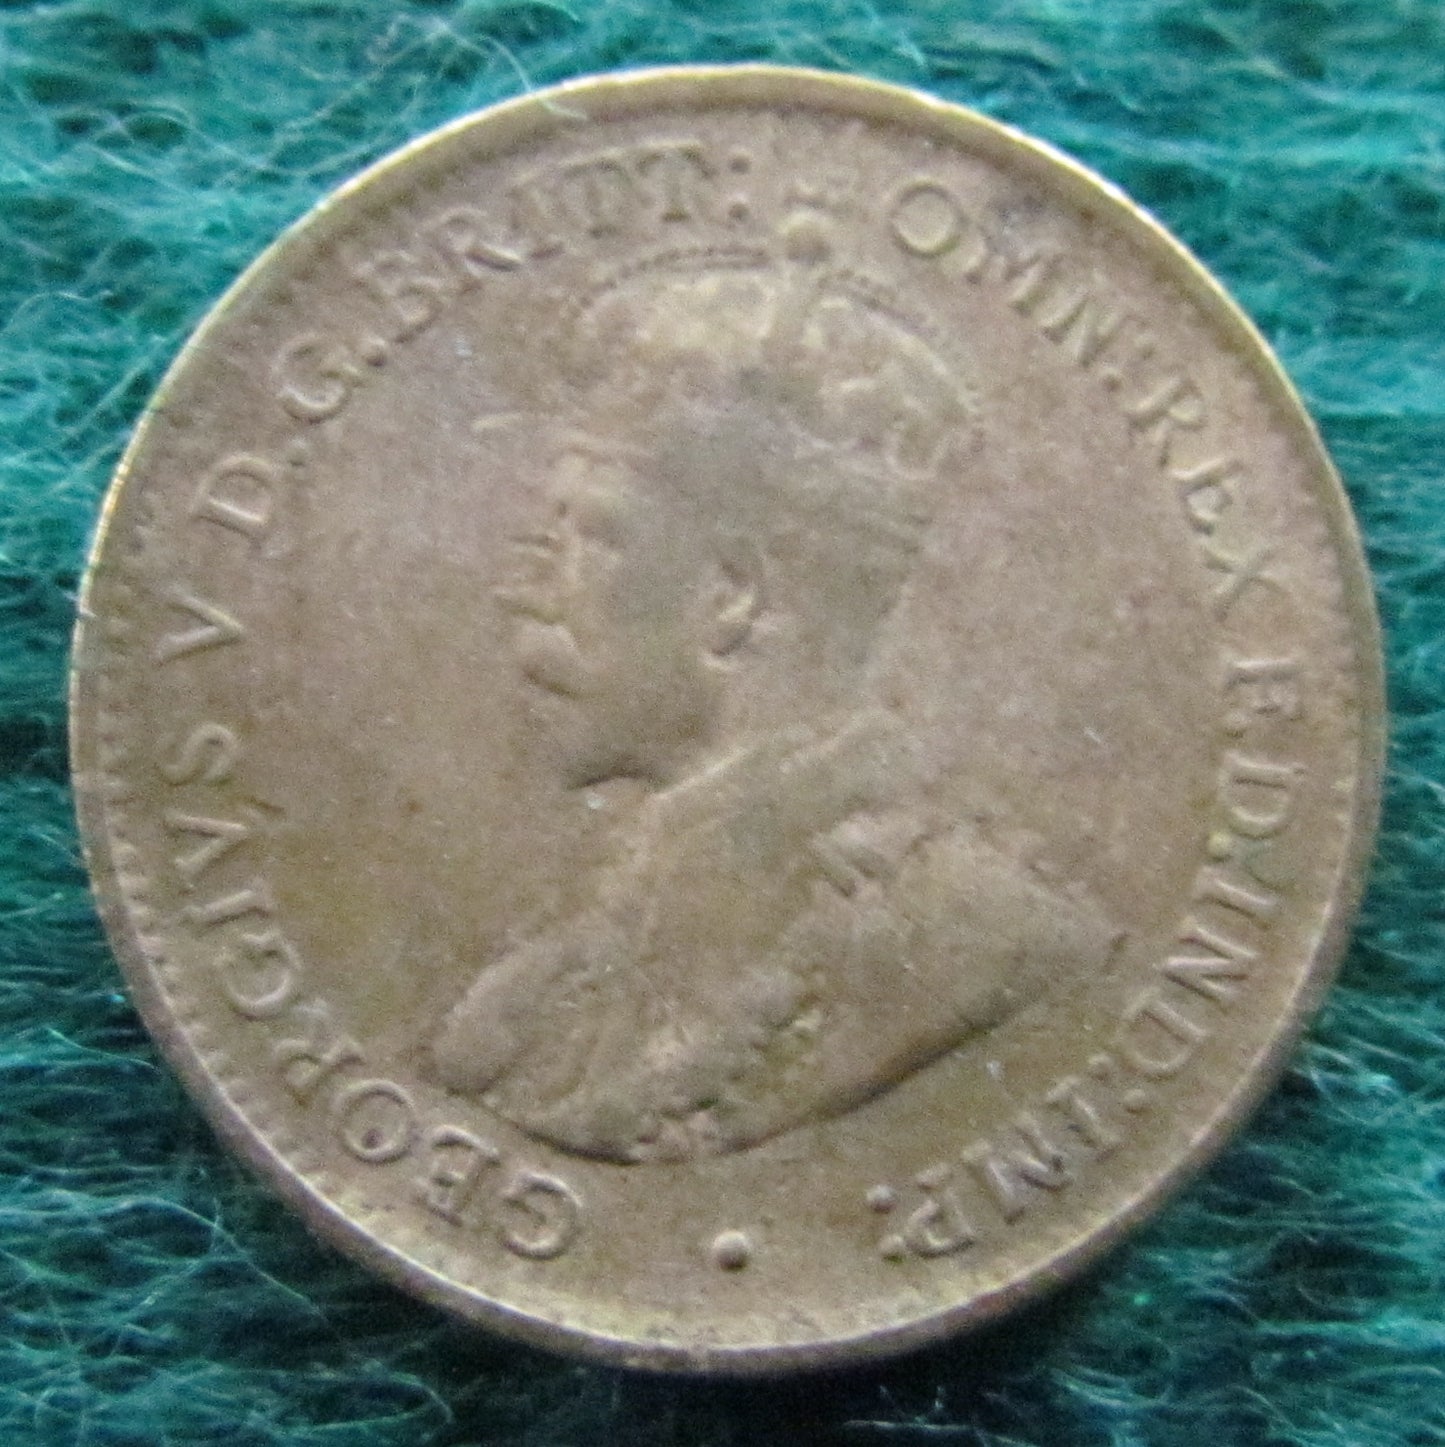 British West Africa 1920 Three 3 Pence King George V Coin - Circulated